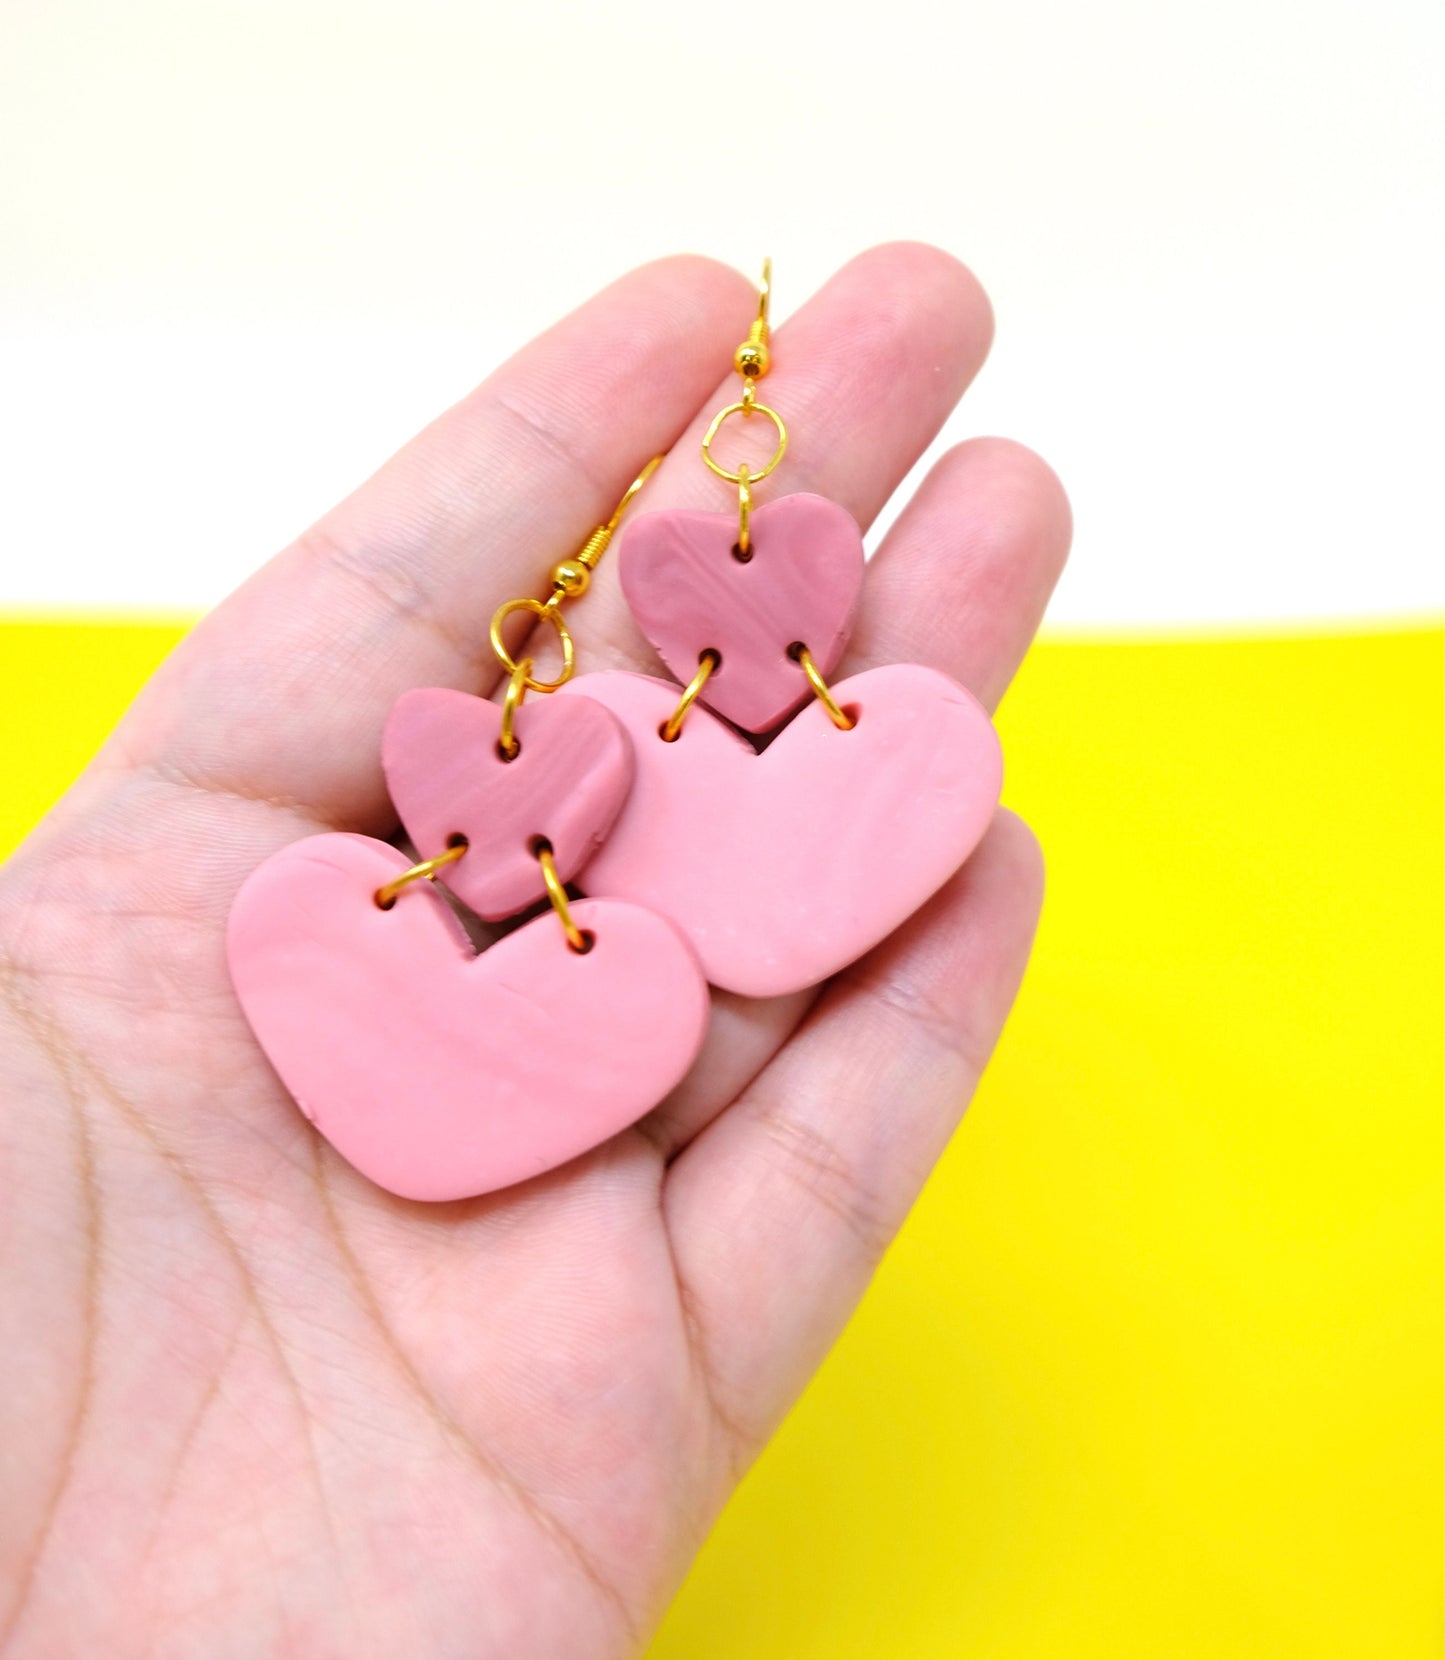 One Off Handmade Polymer Clay Earrings - Assorted Hearts and Moon Earrings - Valentine's Day Collection - Imperfectly Perfect Seconds